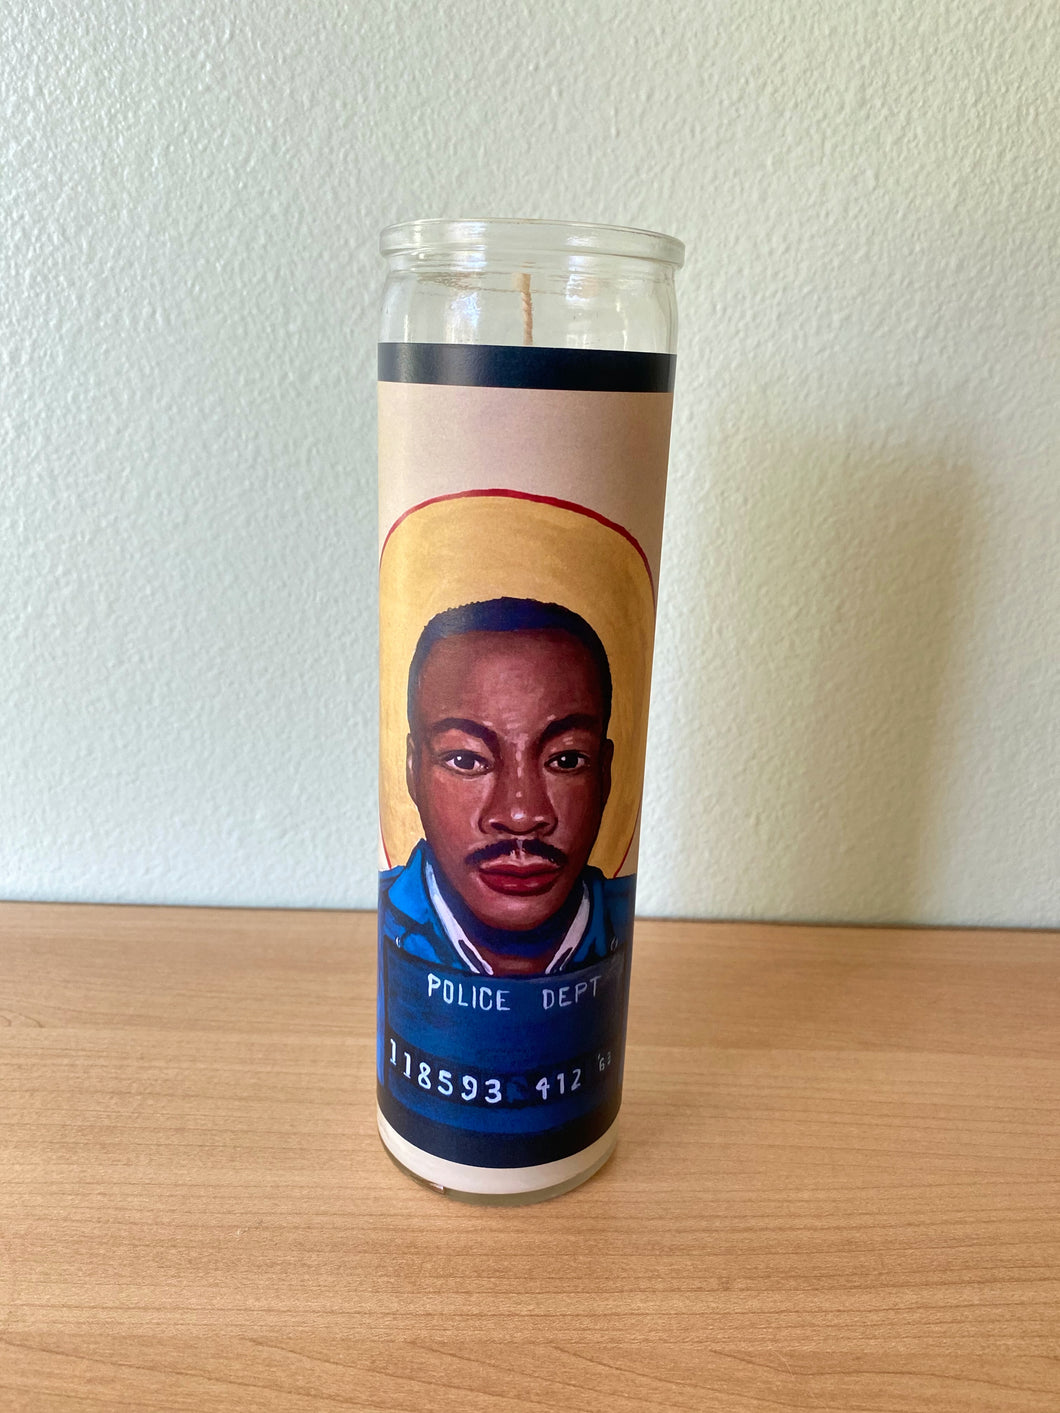 Martin Luther King Jr. Prayer Candle